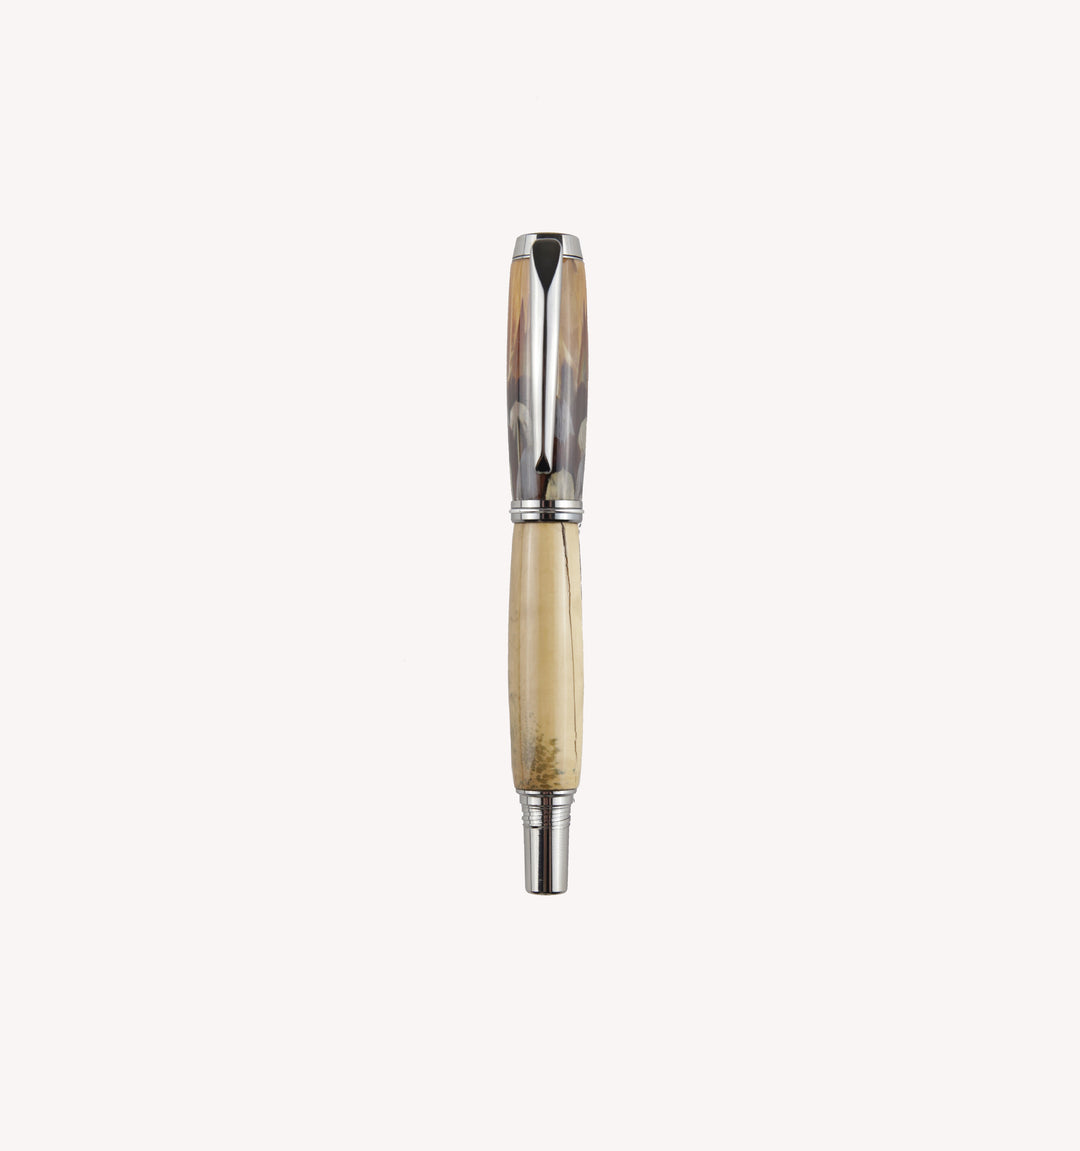 David Feather and Woolly Mammoth Tusk Pen